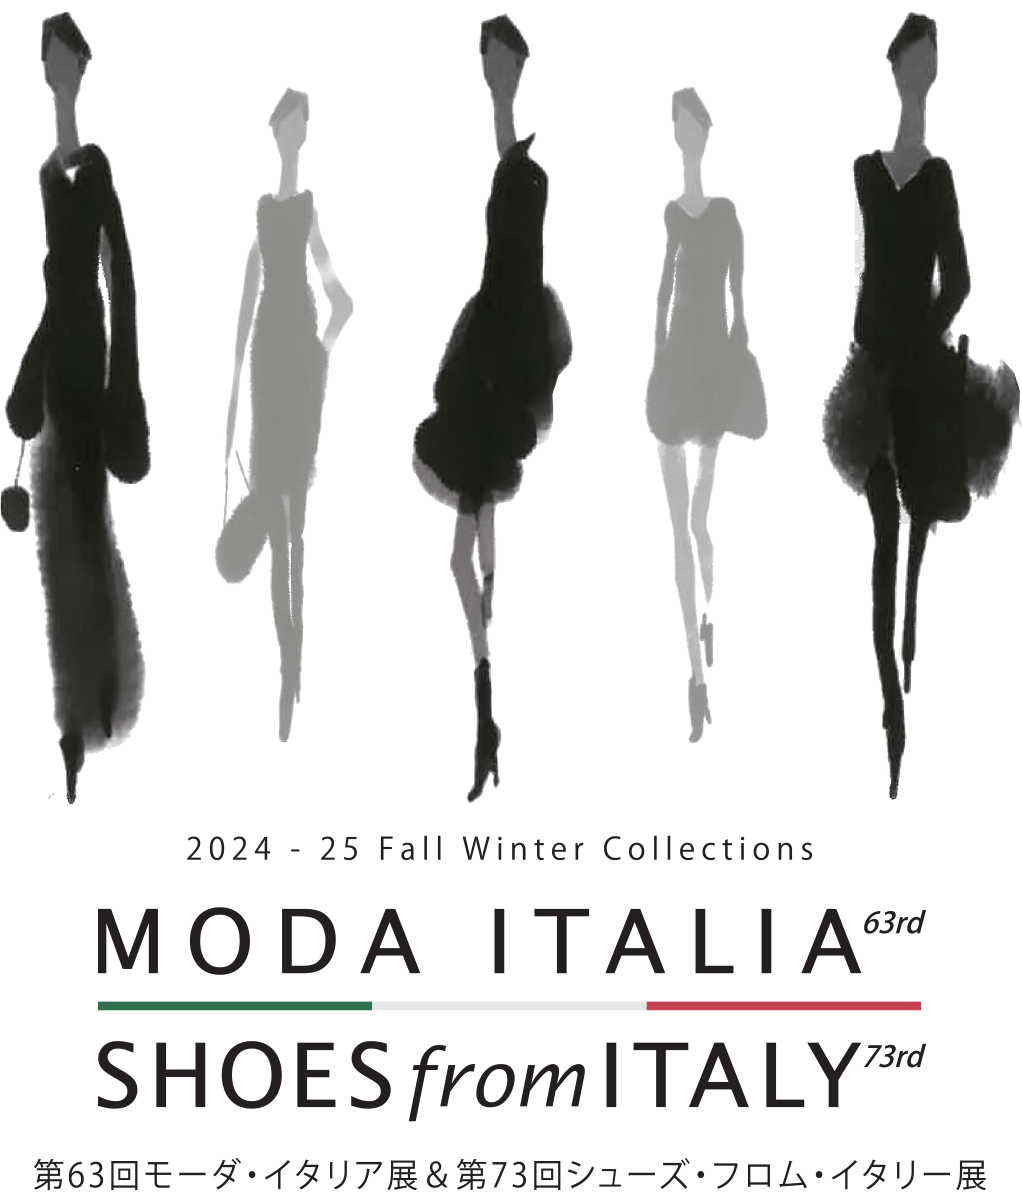 2024 - 25 fall winter Collections MODA ITALIA 63rd & SHOES from ITALY 73rd